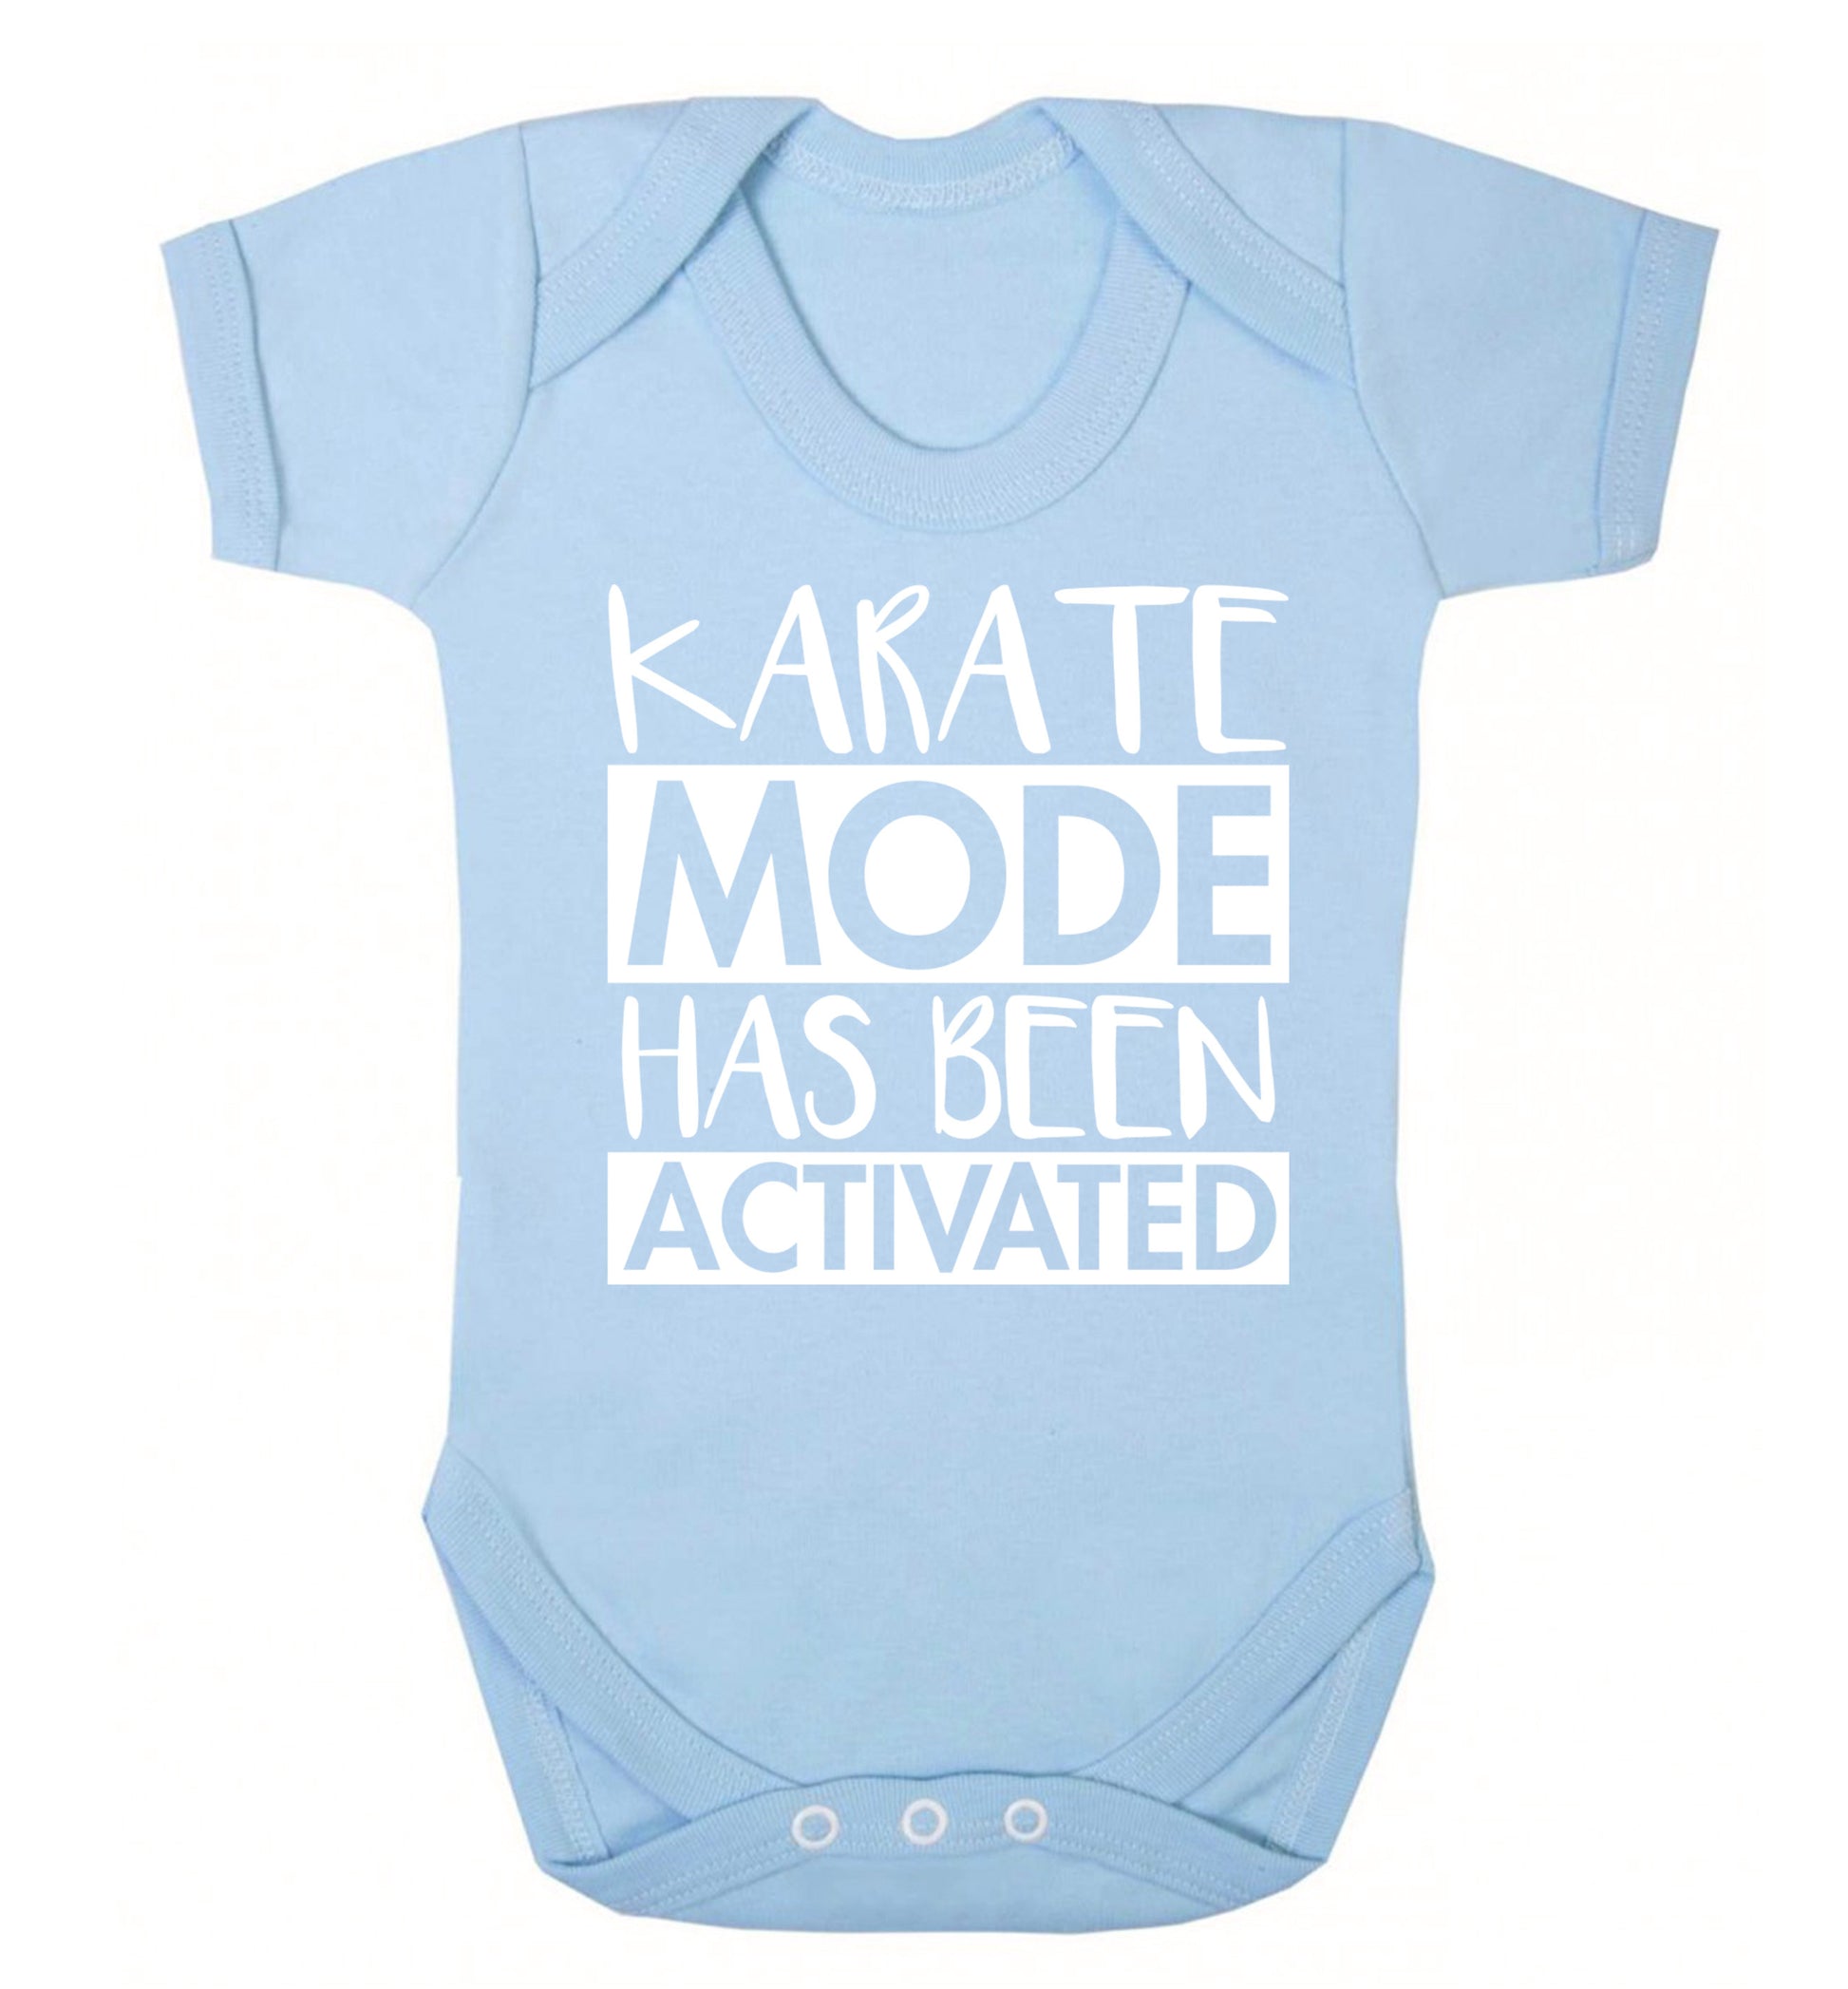 Karate mode activated Baby Vest pale blue 18-24 months